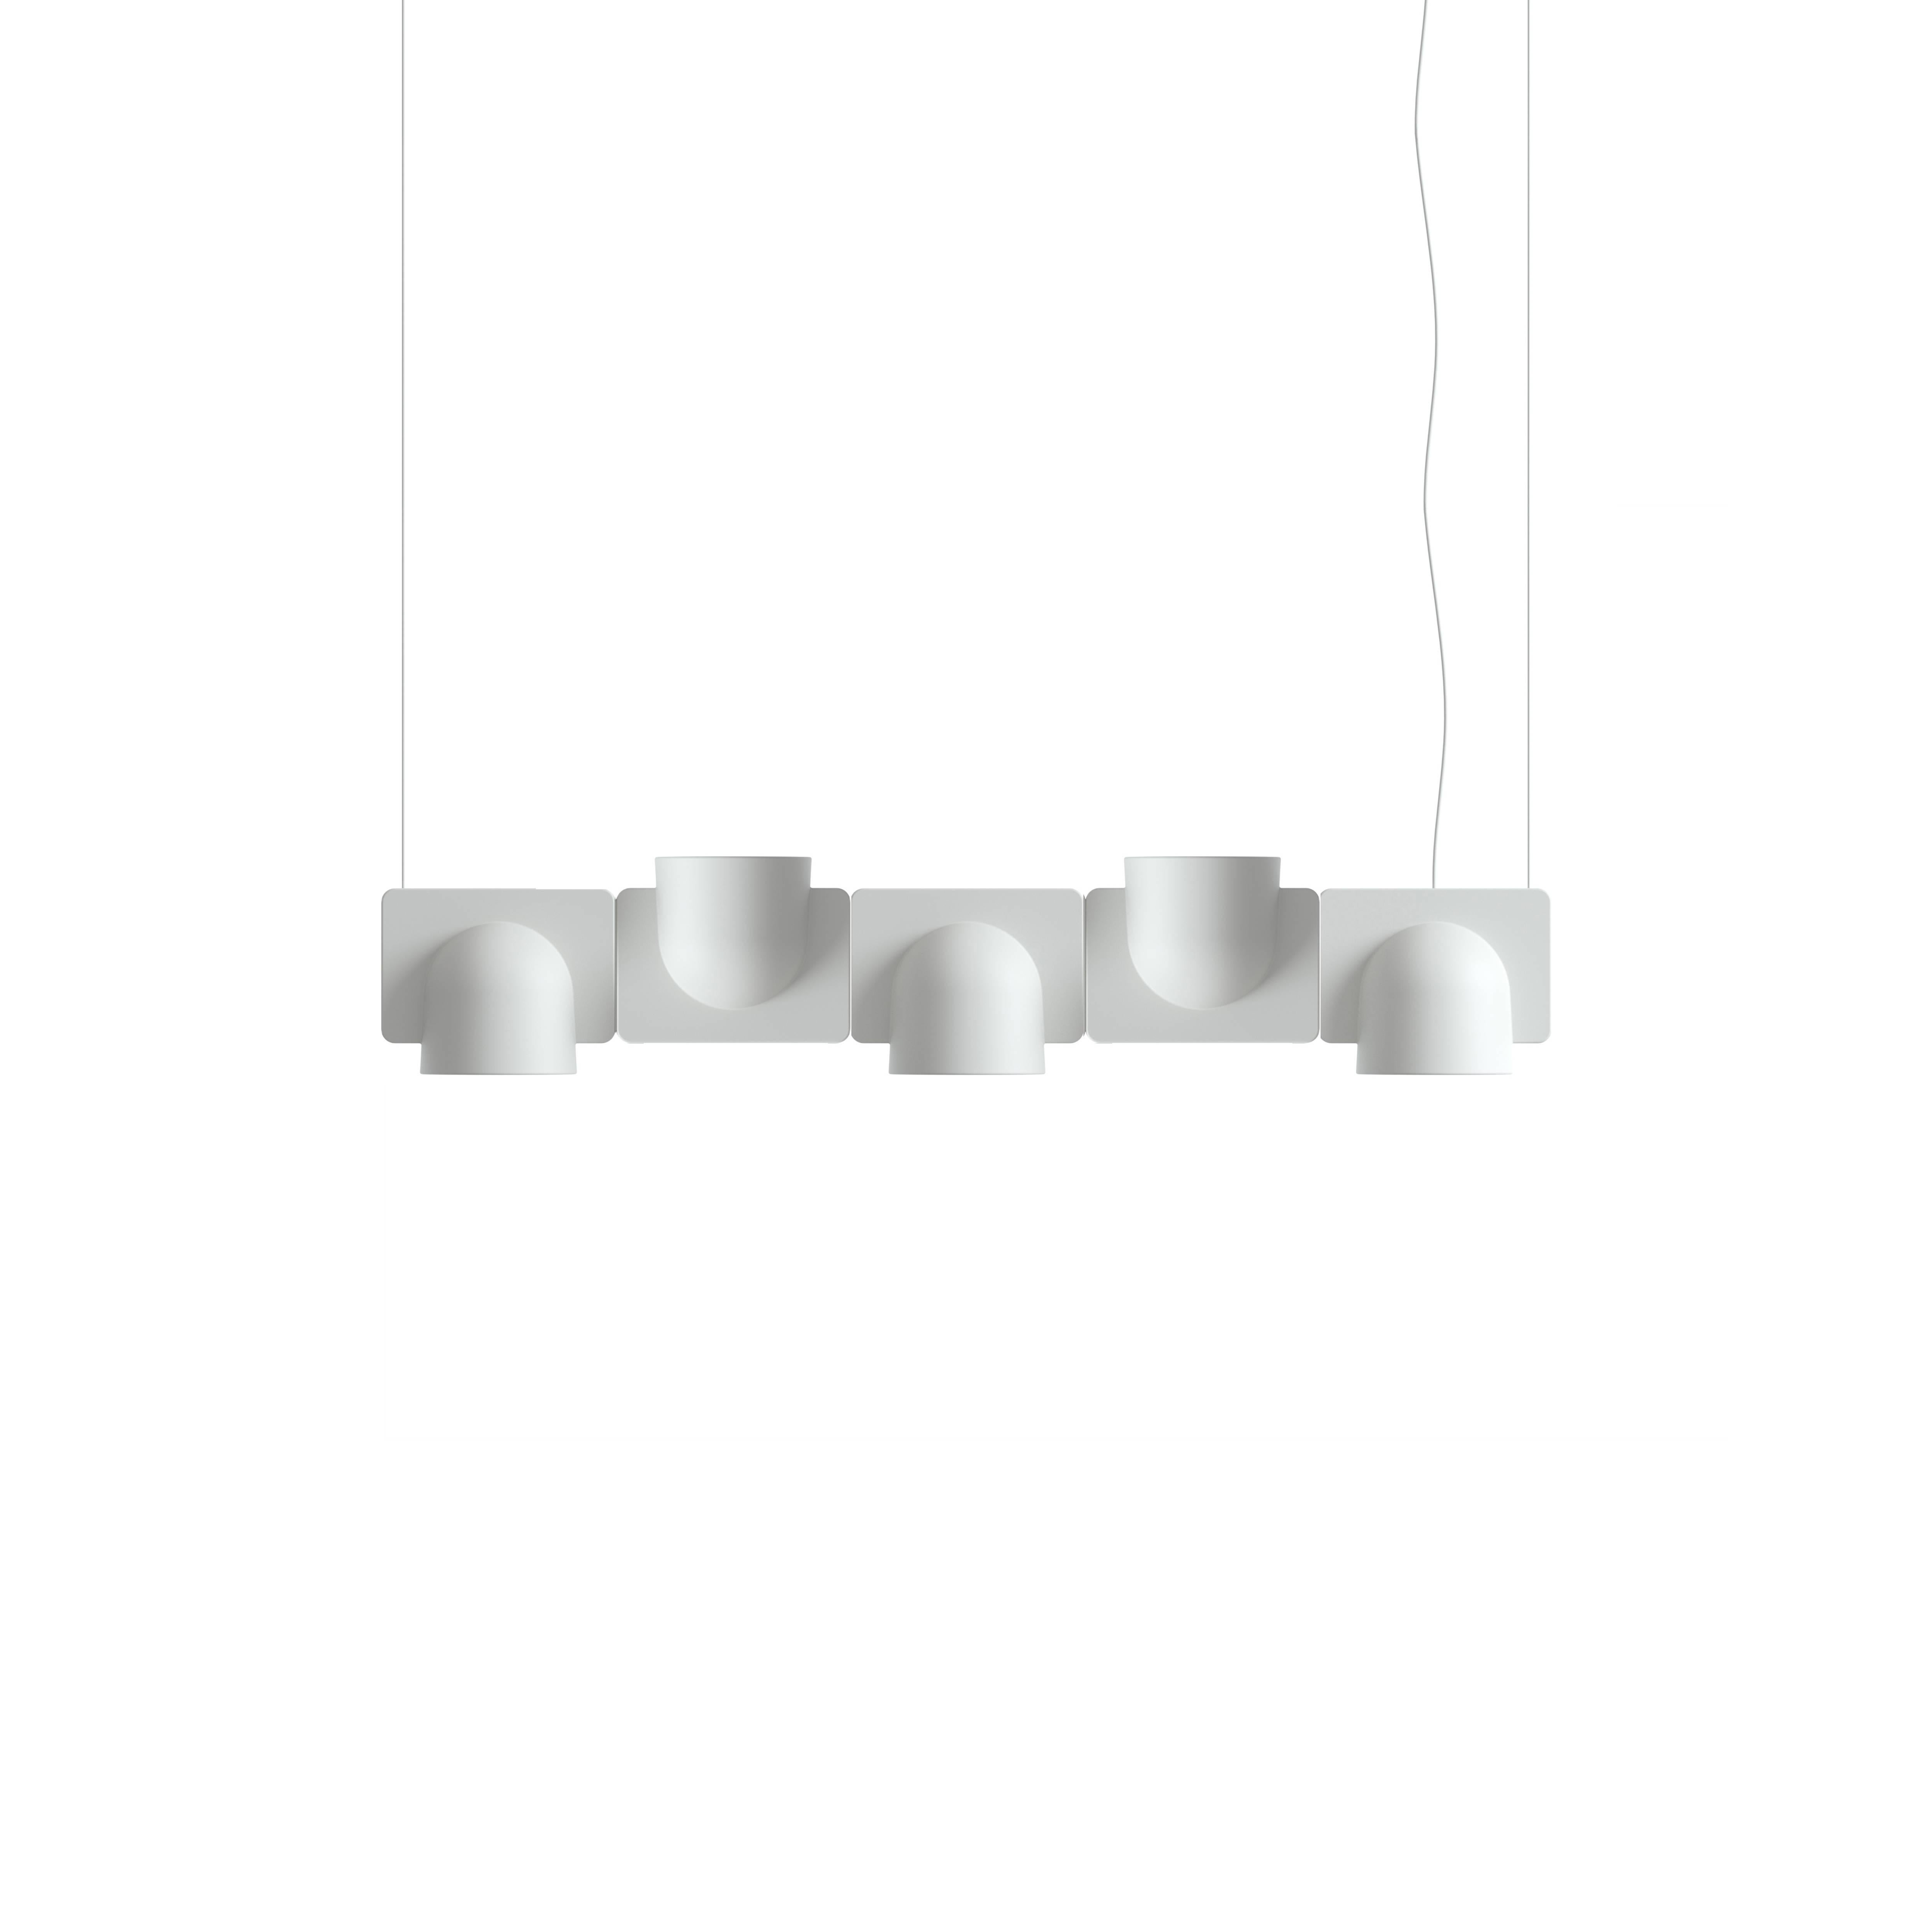 The Igloo system suspension lamp in techno polymer plastic designed by Studio Klass in 2014 and manufactured by Fontana Arte, 2017, represents the great innovation in the segment of hanging spotlights. It is a modular, self-supporting lighting